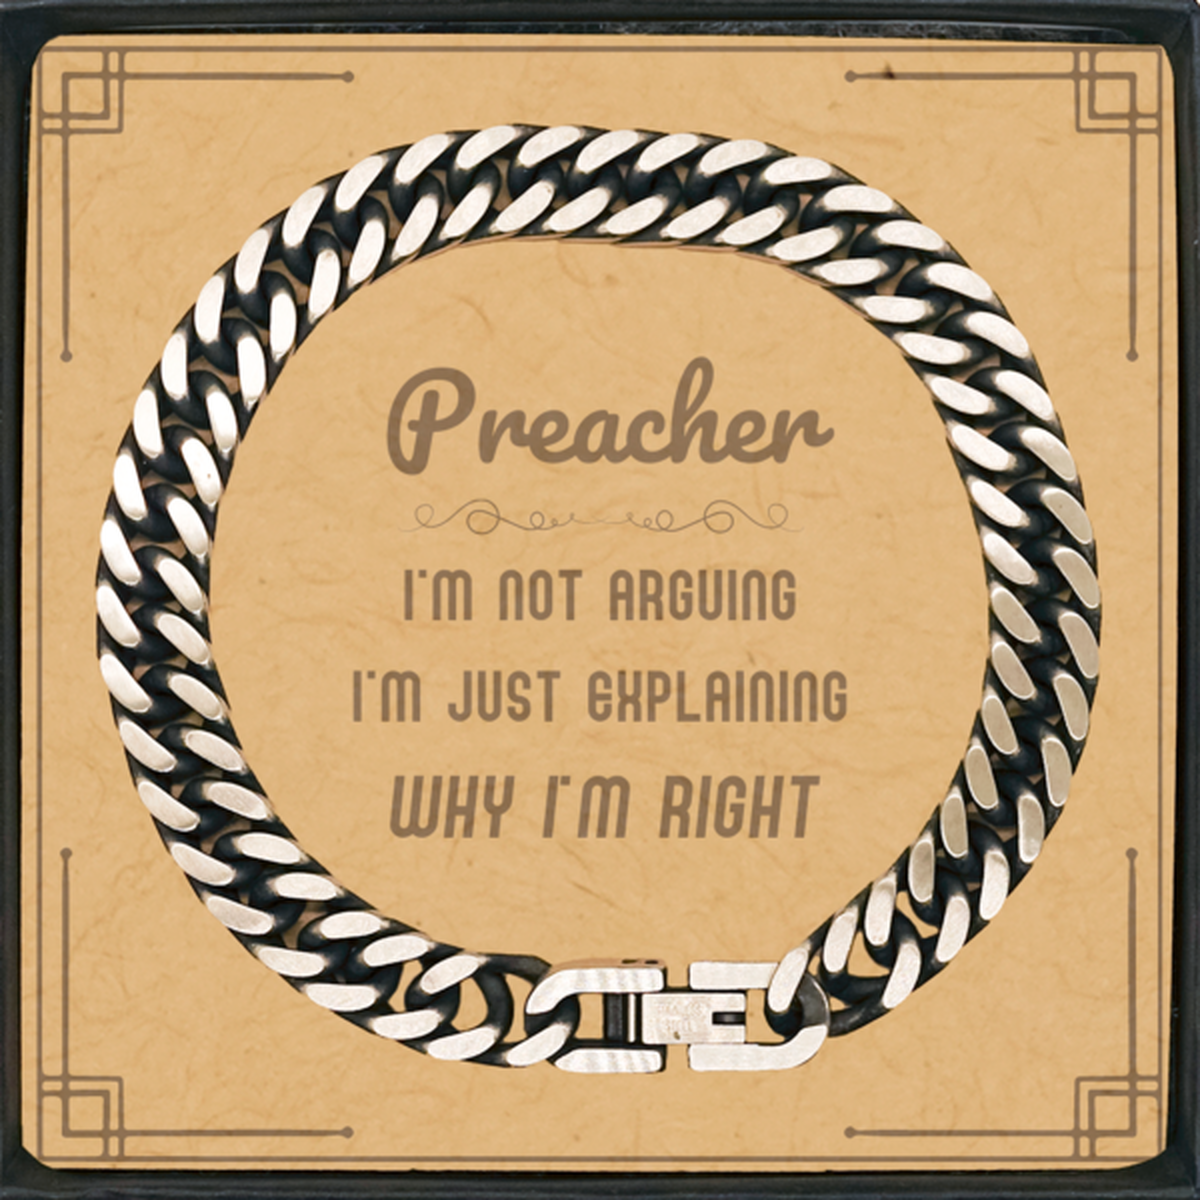 Preacher I'm not Arguing. I'm Just Explaining Why I'm RIGHT Cuban Link Chain Bracelet, Funny Saying Quote Preacher Gifts For Preacher Message Card Graduation Birthday Christmas Gifts for Men Women Coworker